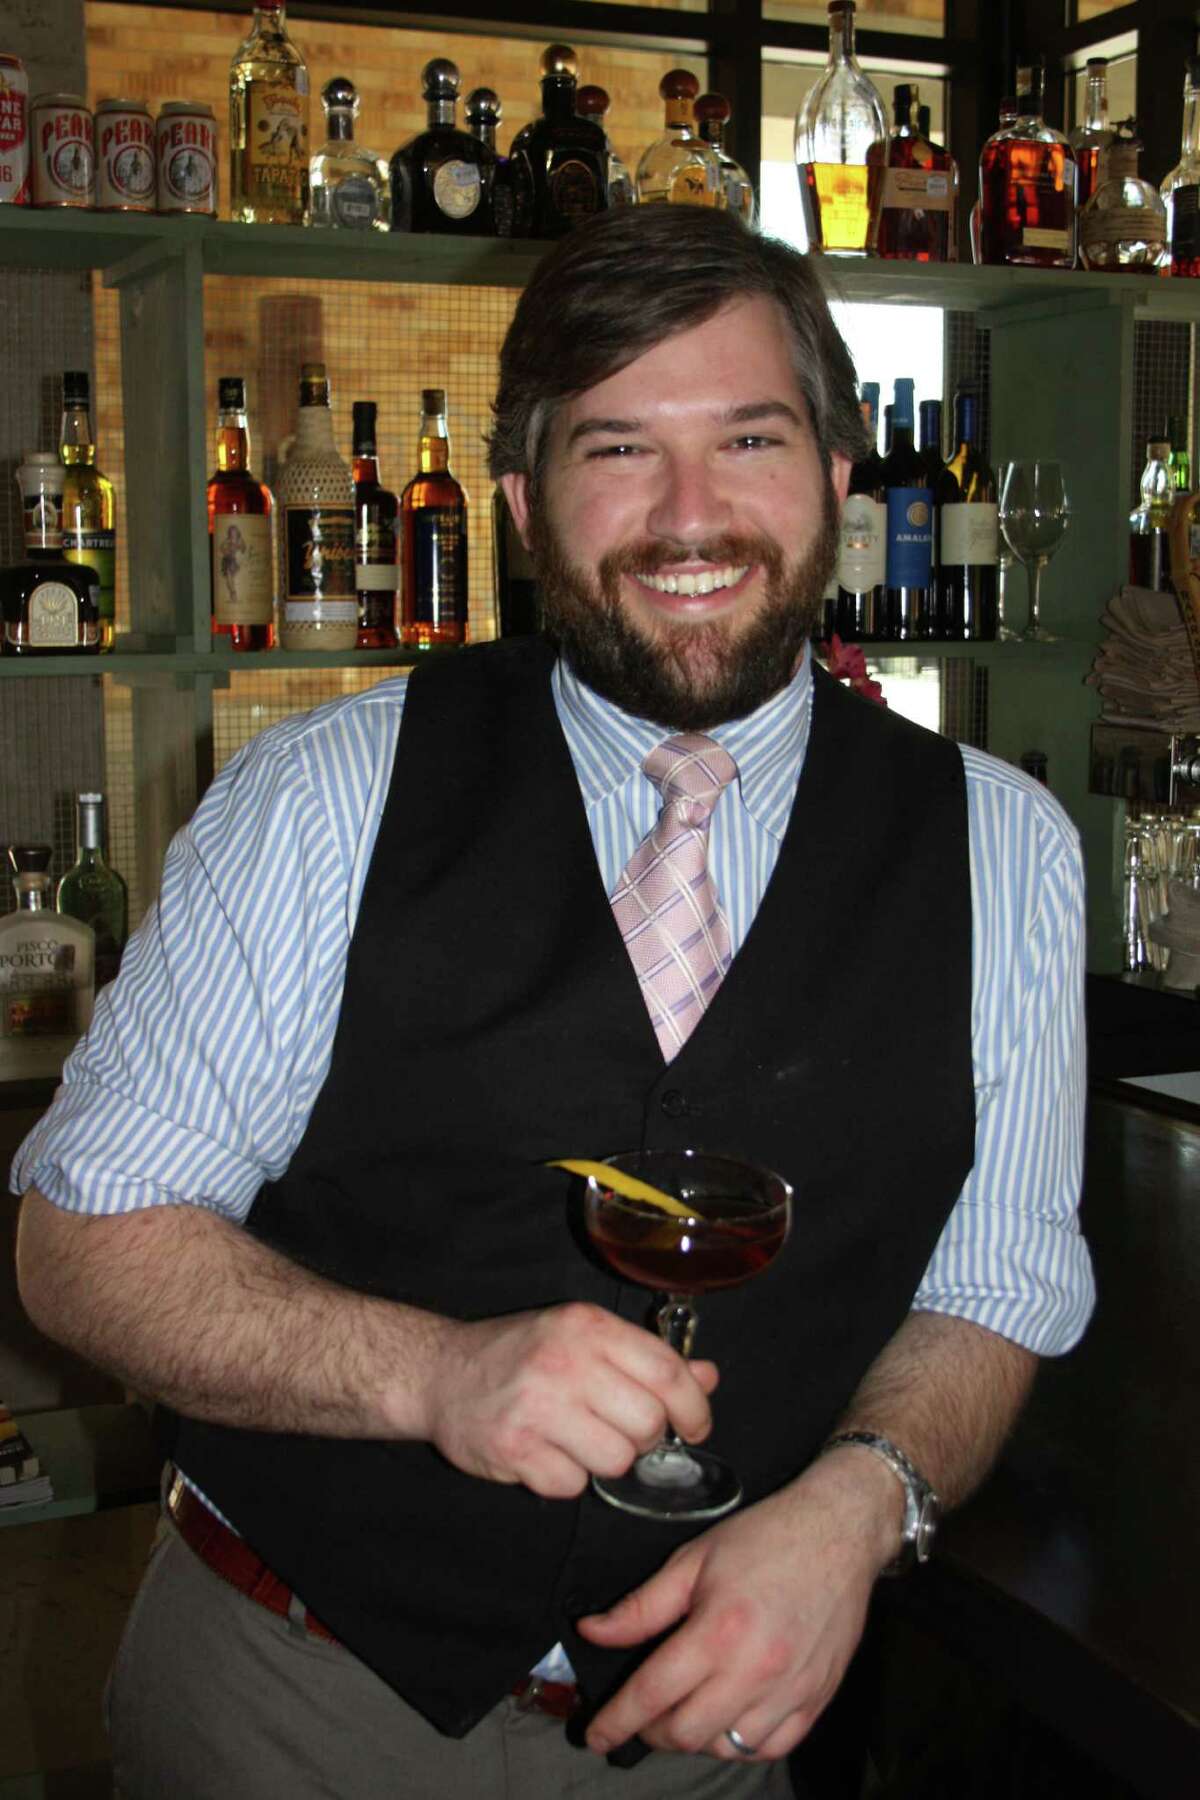 Chris Ware when he was the bar manager at Arcade Midtown Kitchen. Ware announced today he's joining Azar Family Brands.